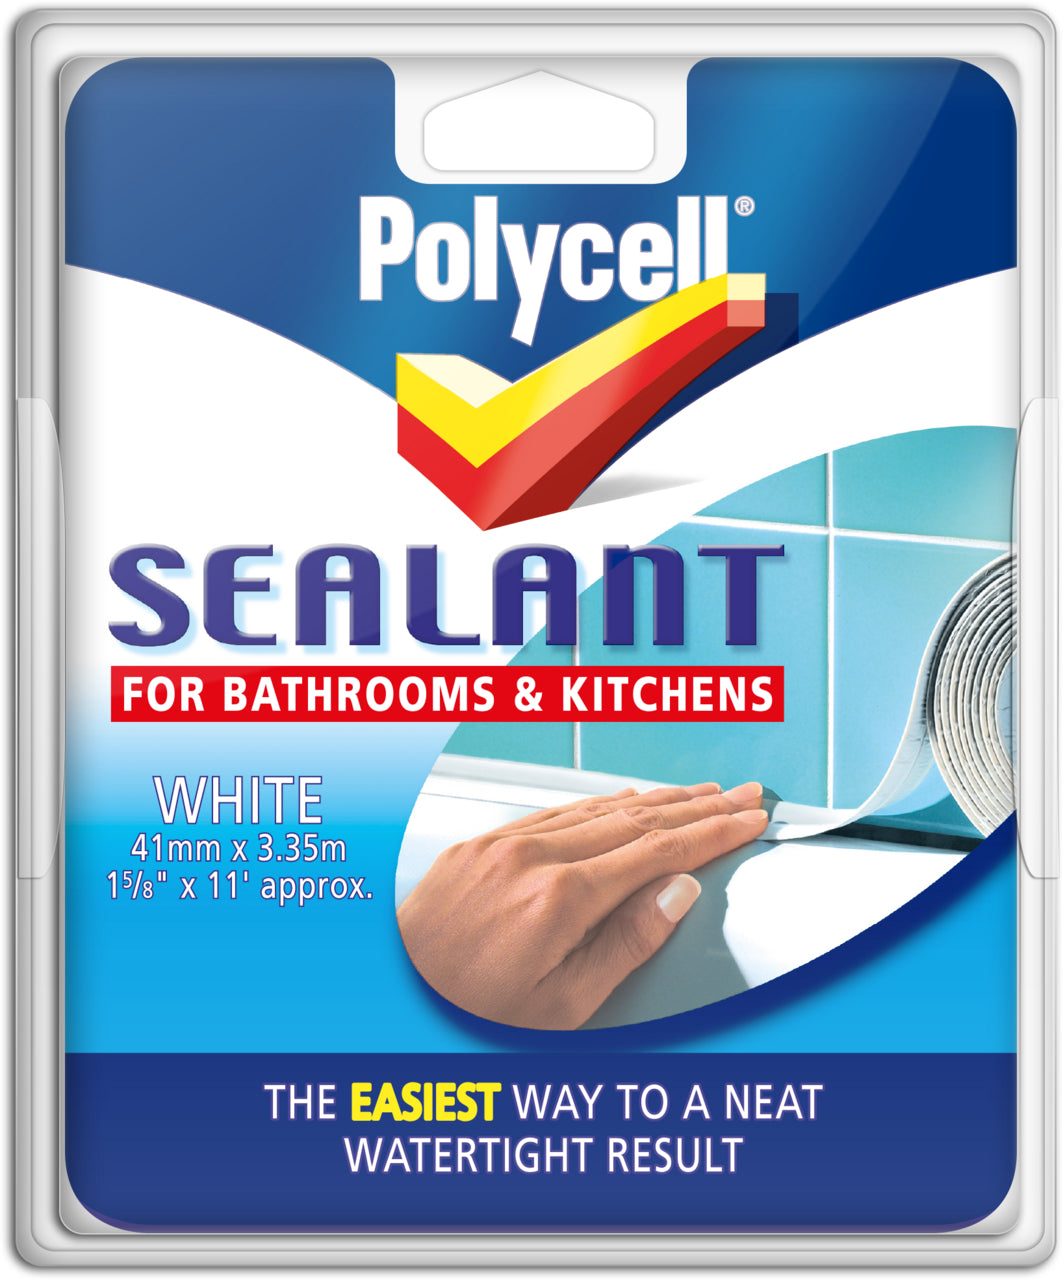 Polycell Sealant Bathroom & Kitchen White 22mm